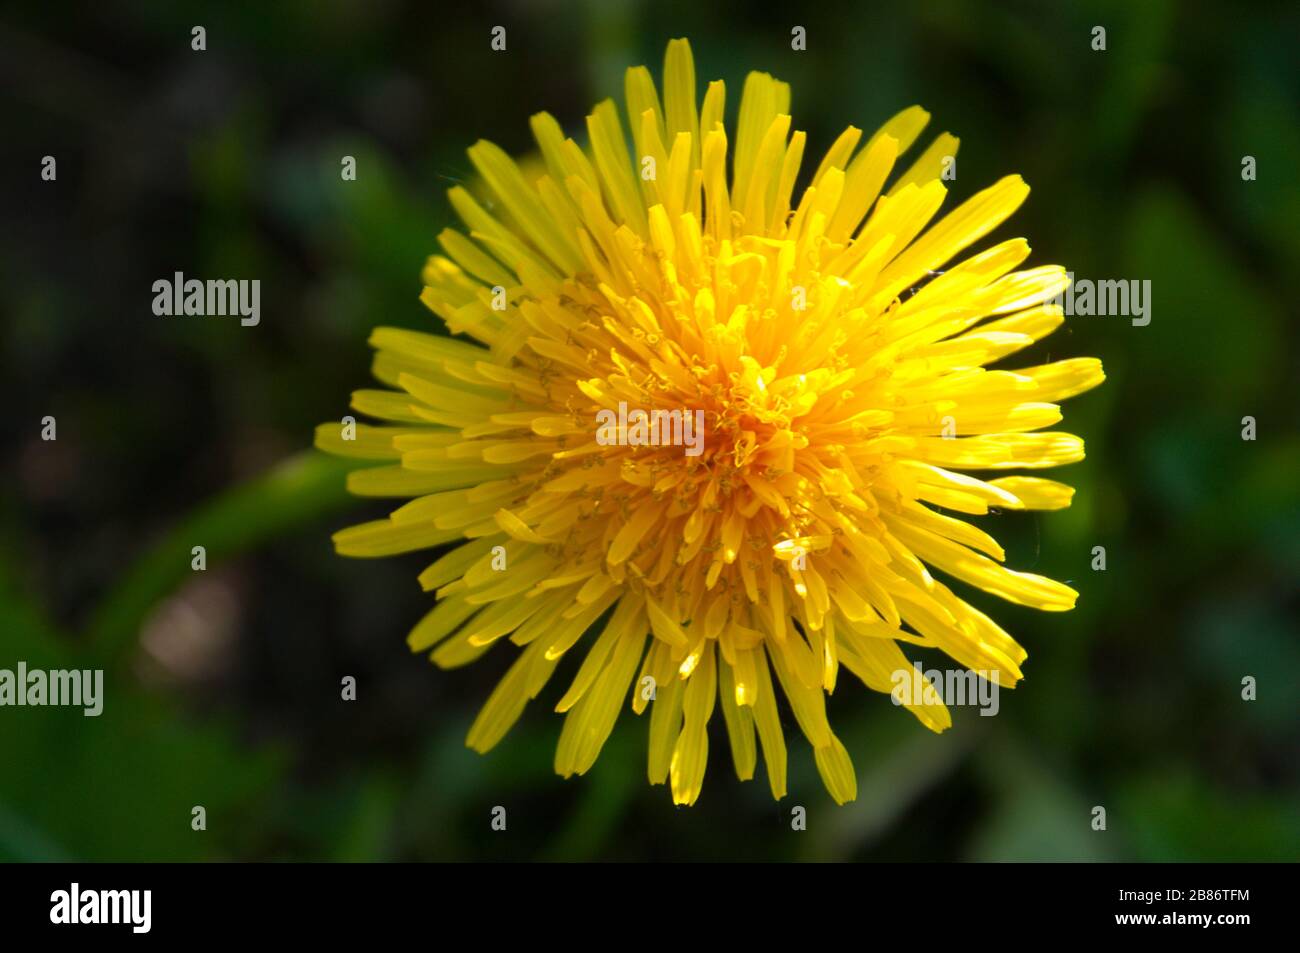 A cheerful sunny dandelion close-up view. Bright spring flower. Stock Photo